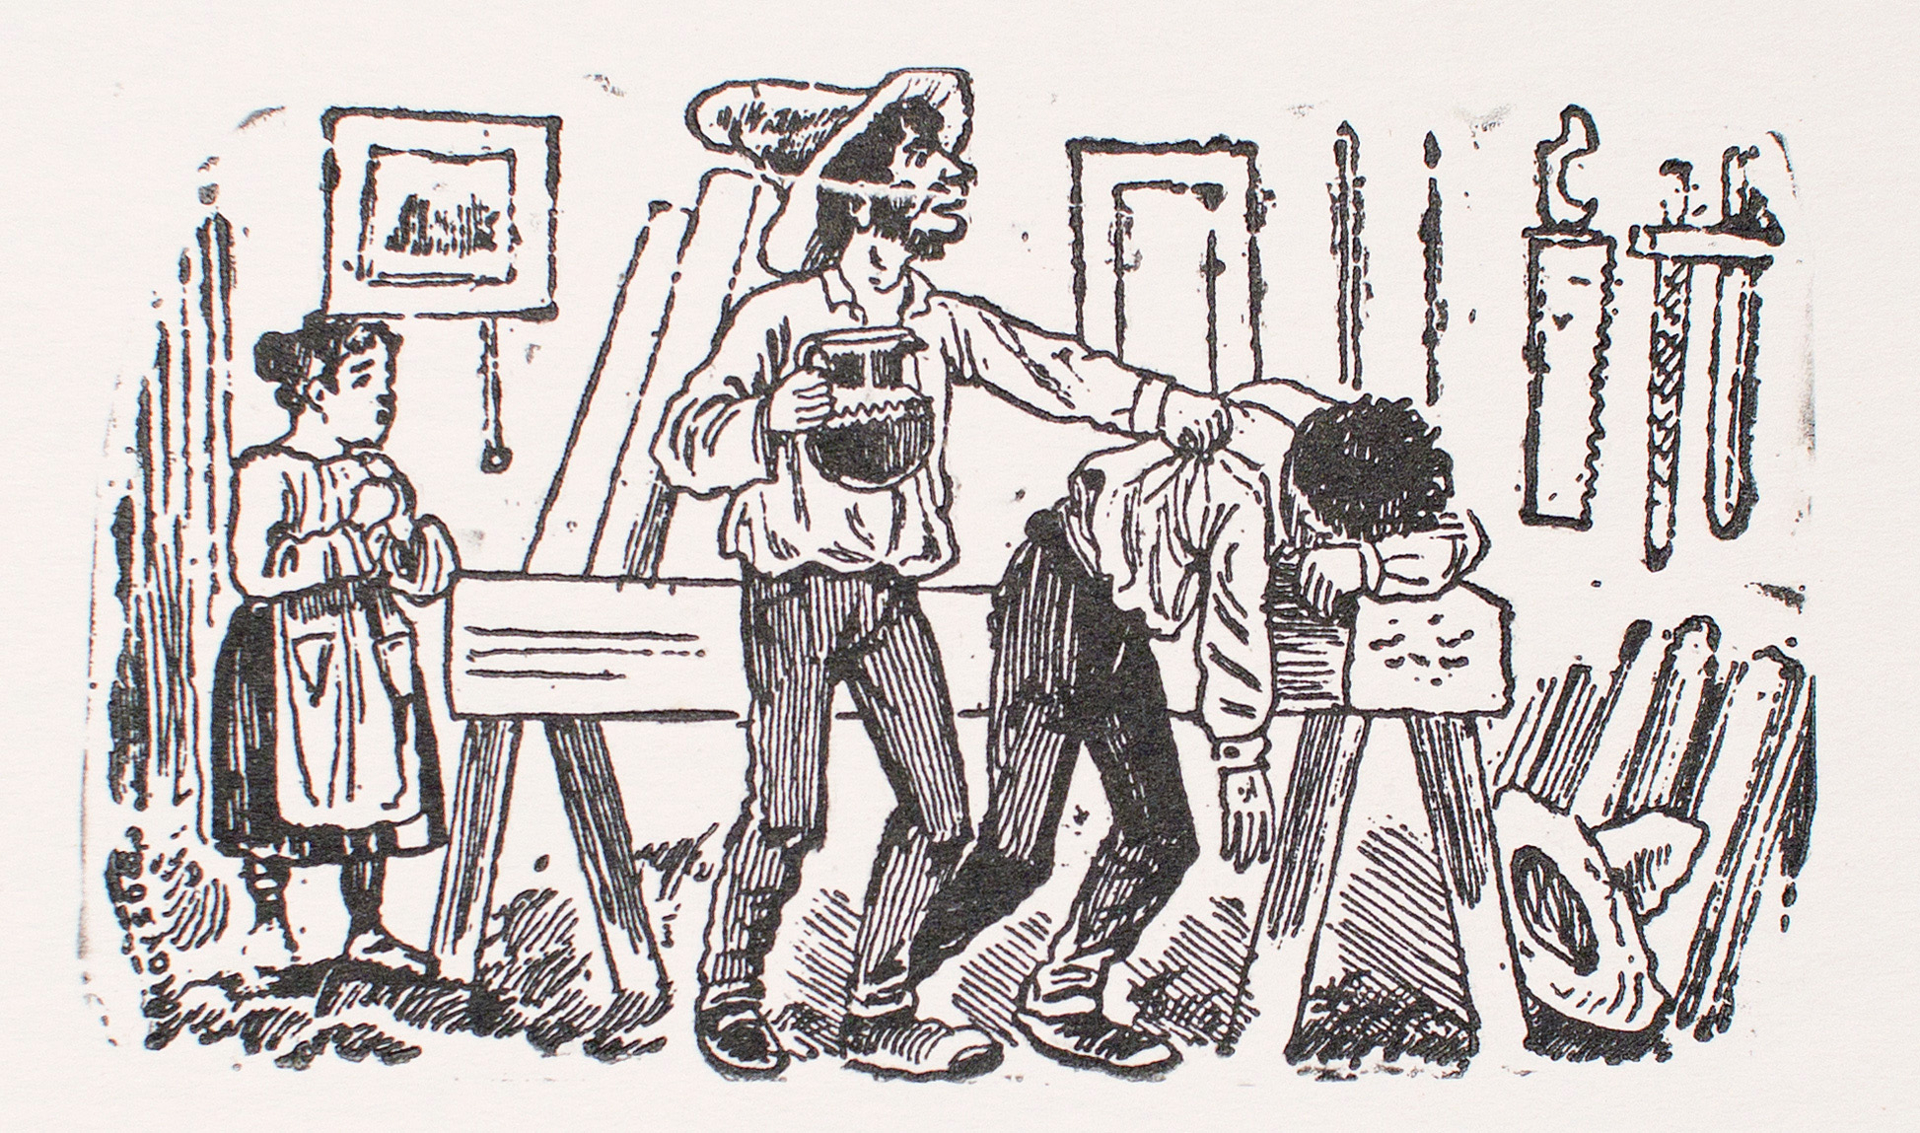 A man with a pitcher in his hand tapping the shoulder of another man resting on wooden beam by José Guadalupe Posada